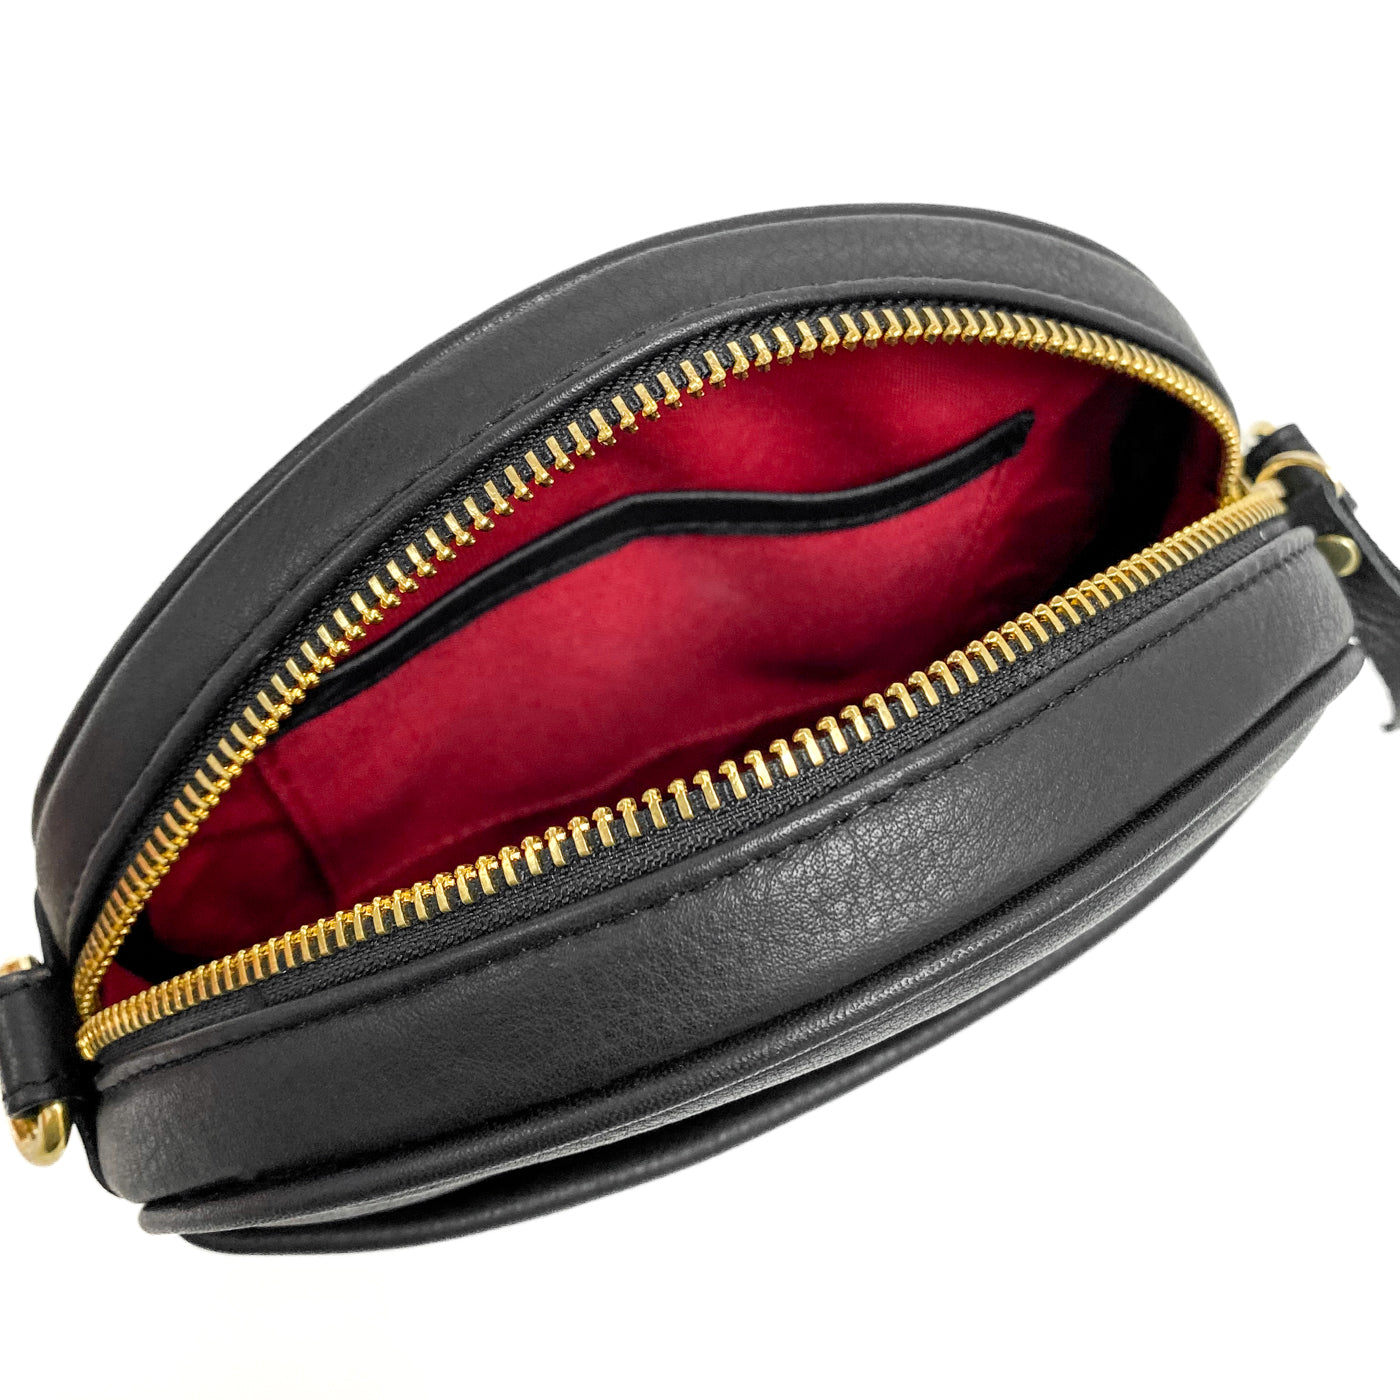 Mini Round Leather Crossbody Bag Black Leather Shoulder Purse for Women, Red